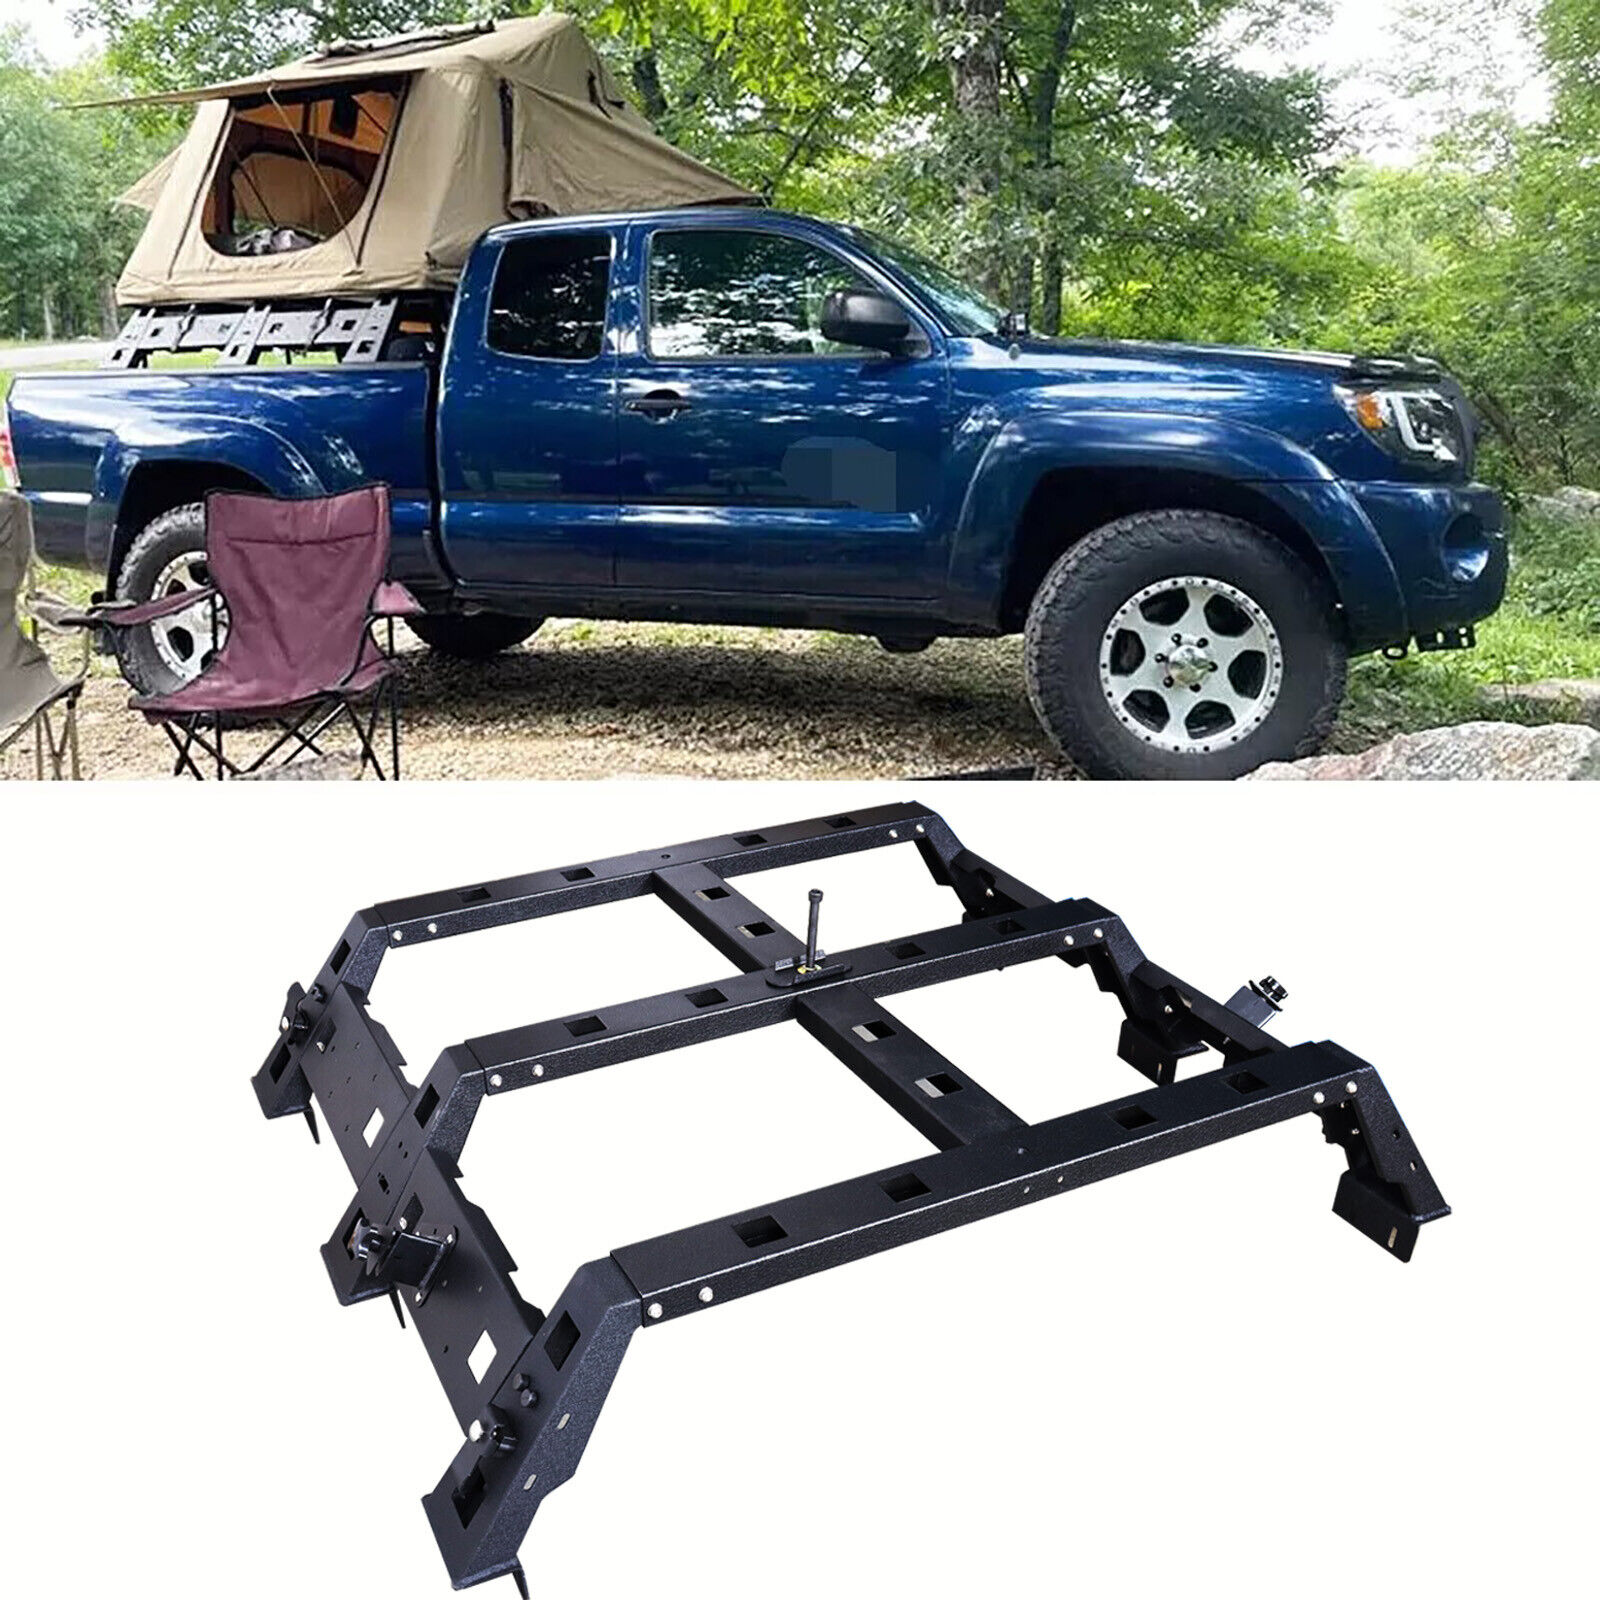 For 2005-2019 Toyota Tacoma Steel Black High Bed Rack Luggage Carrier Holder